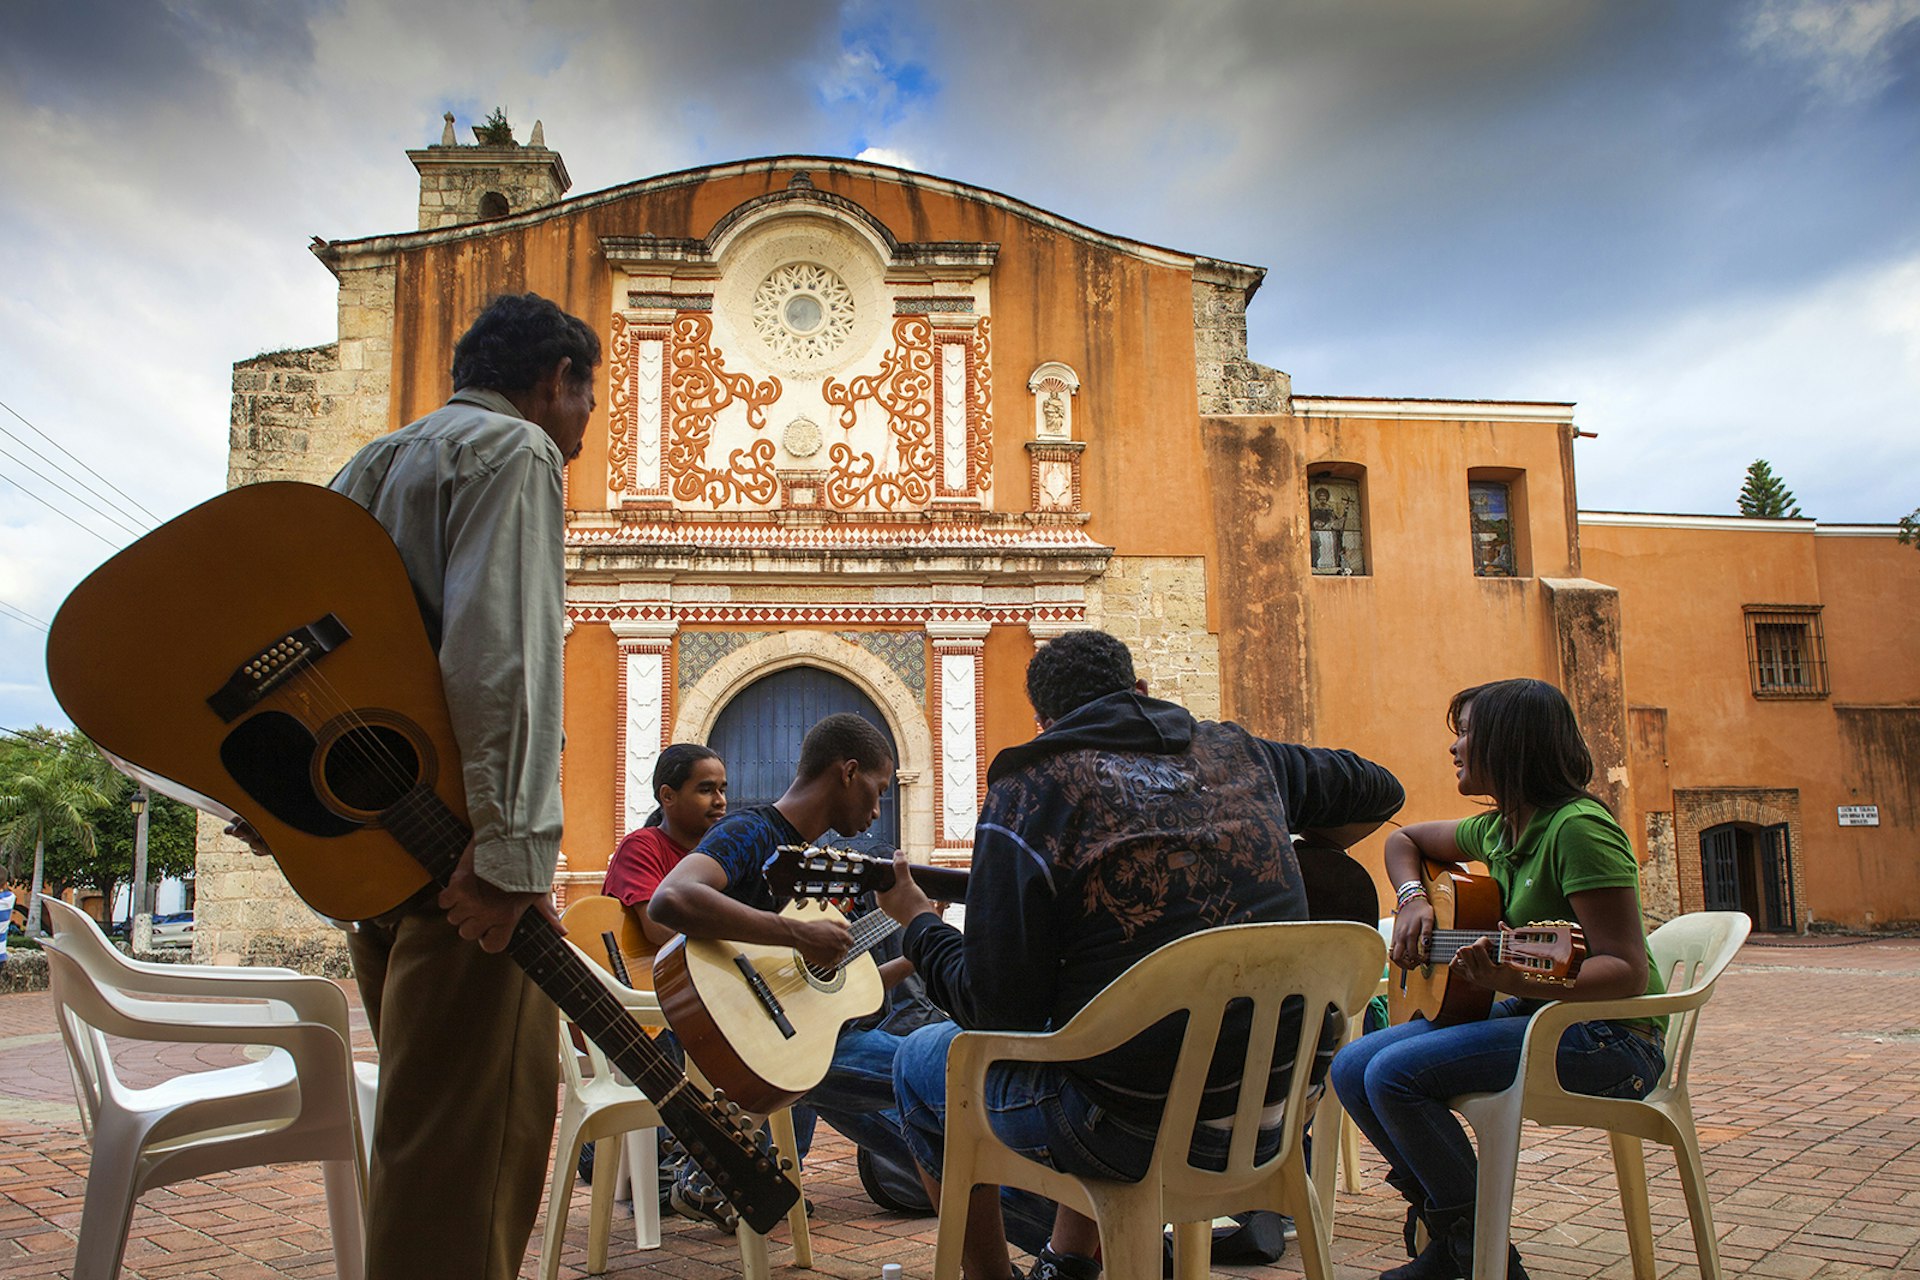 A group practices the guitar outside the Convento de los Dominicos in Santo Domingo © Jane Sweeny / Getty Images